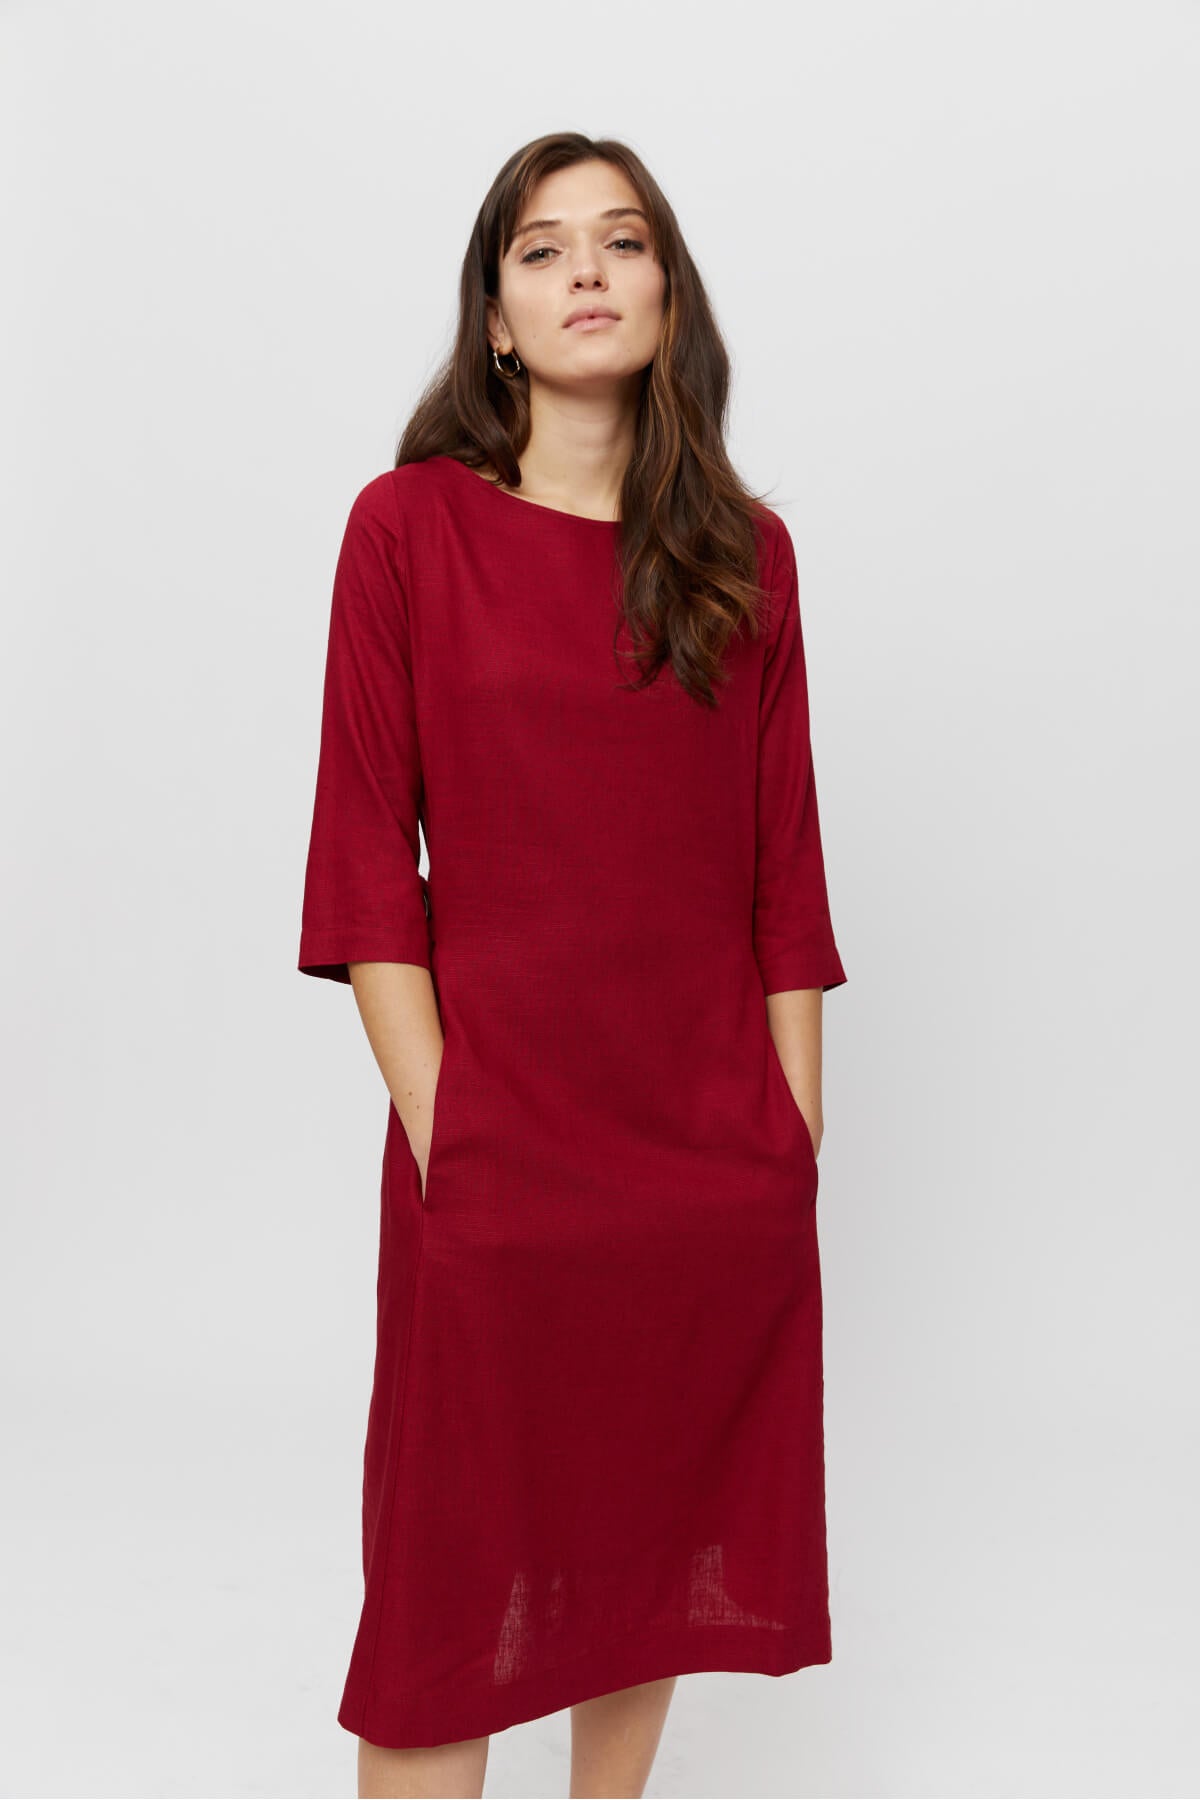 Maxi Dress EMILIA, A Line Casual Linen Dress in Red - AYANI